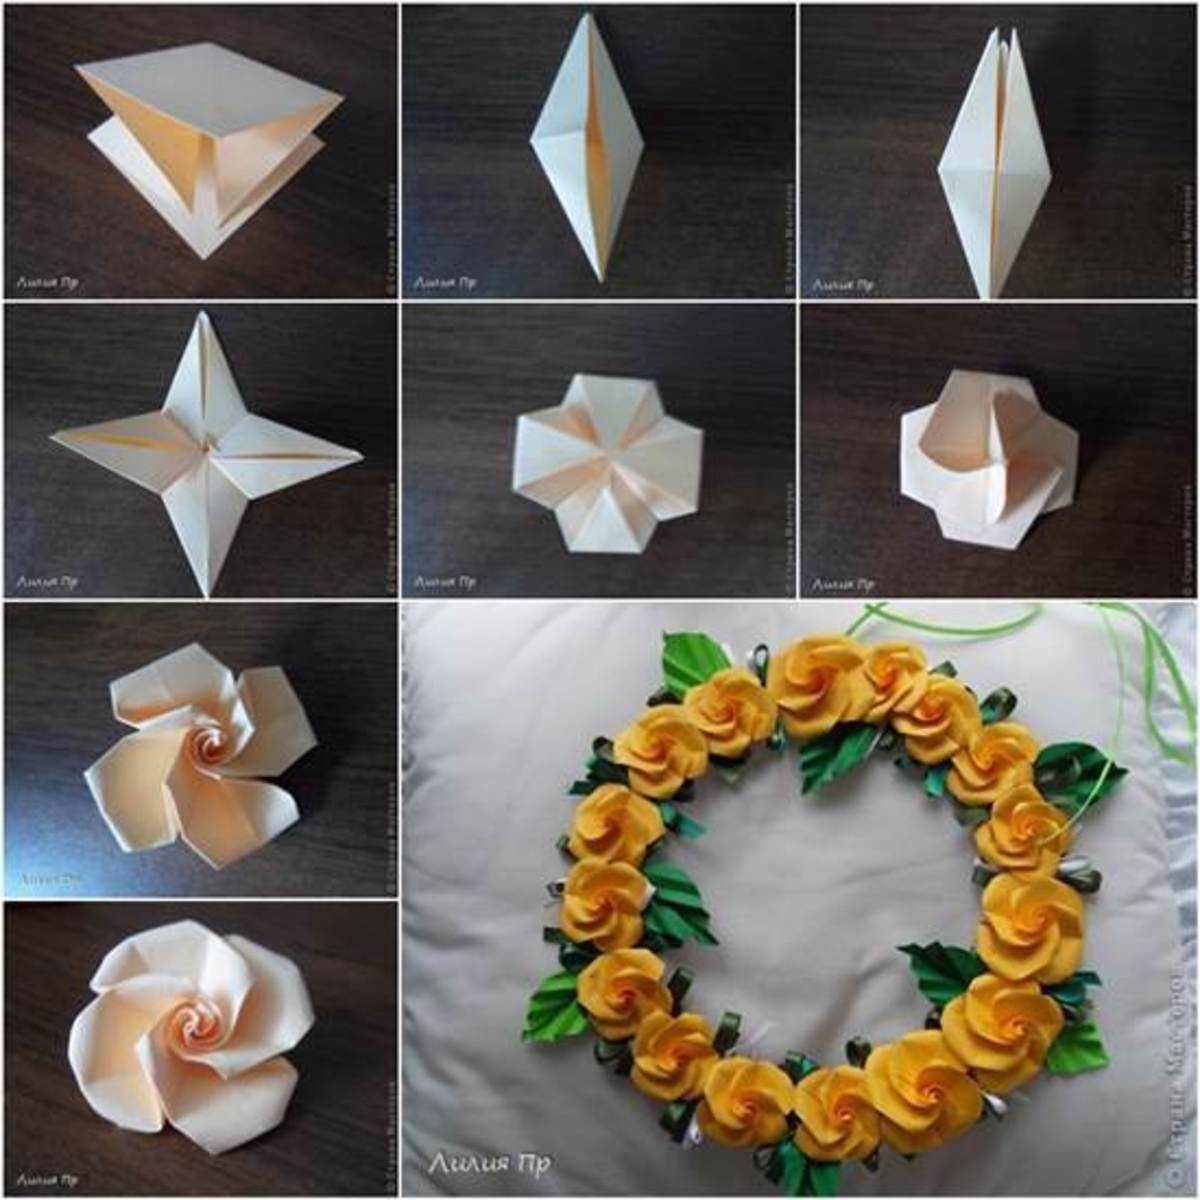 How to Make Paper Flowers: Fun and Easy Craft Ideas - FeltMagnet